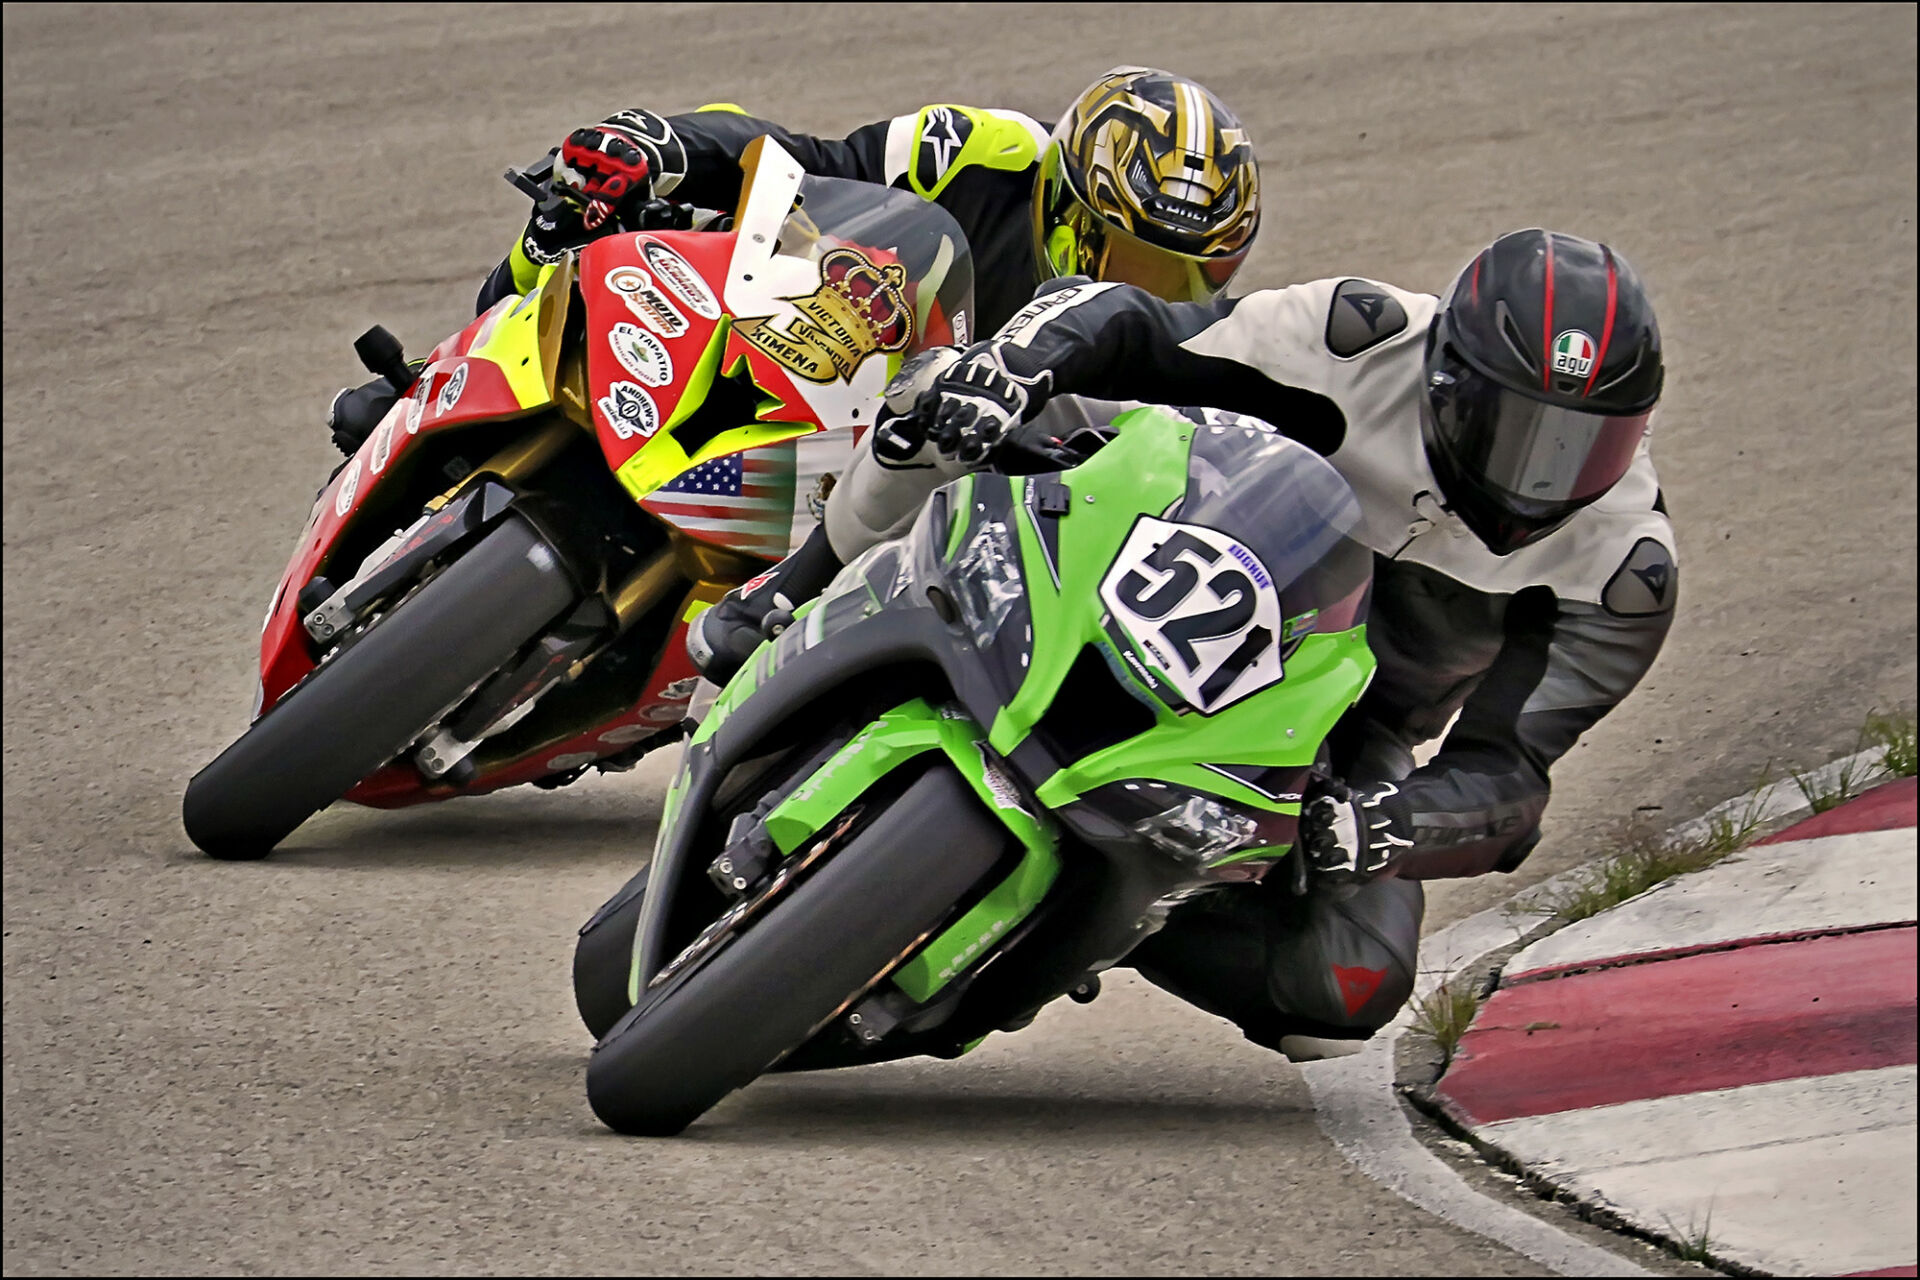 Anthony Norton (512) fends off Genaro Lopez (3) through the Release corner during Round Two of the UtahSBA’s King of the Mountain GTO Race held at Utah Motorsports Campus’ East Track. Photo by Steve Midgley, courtesy UtahSBA.